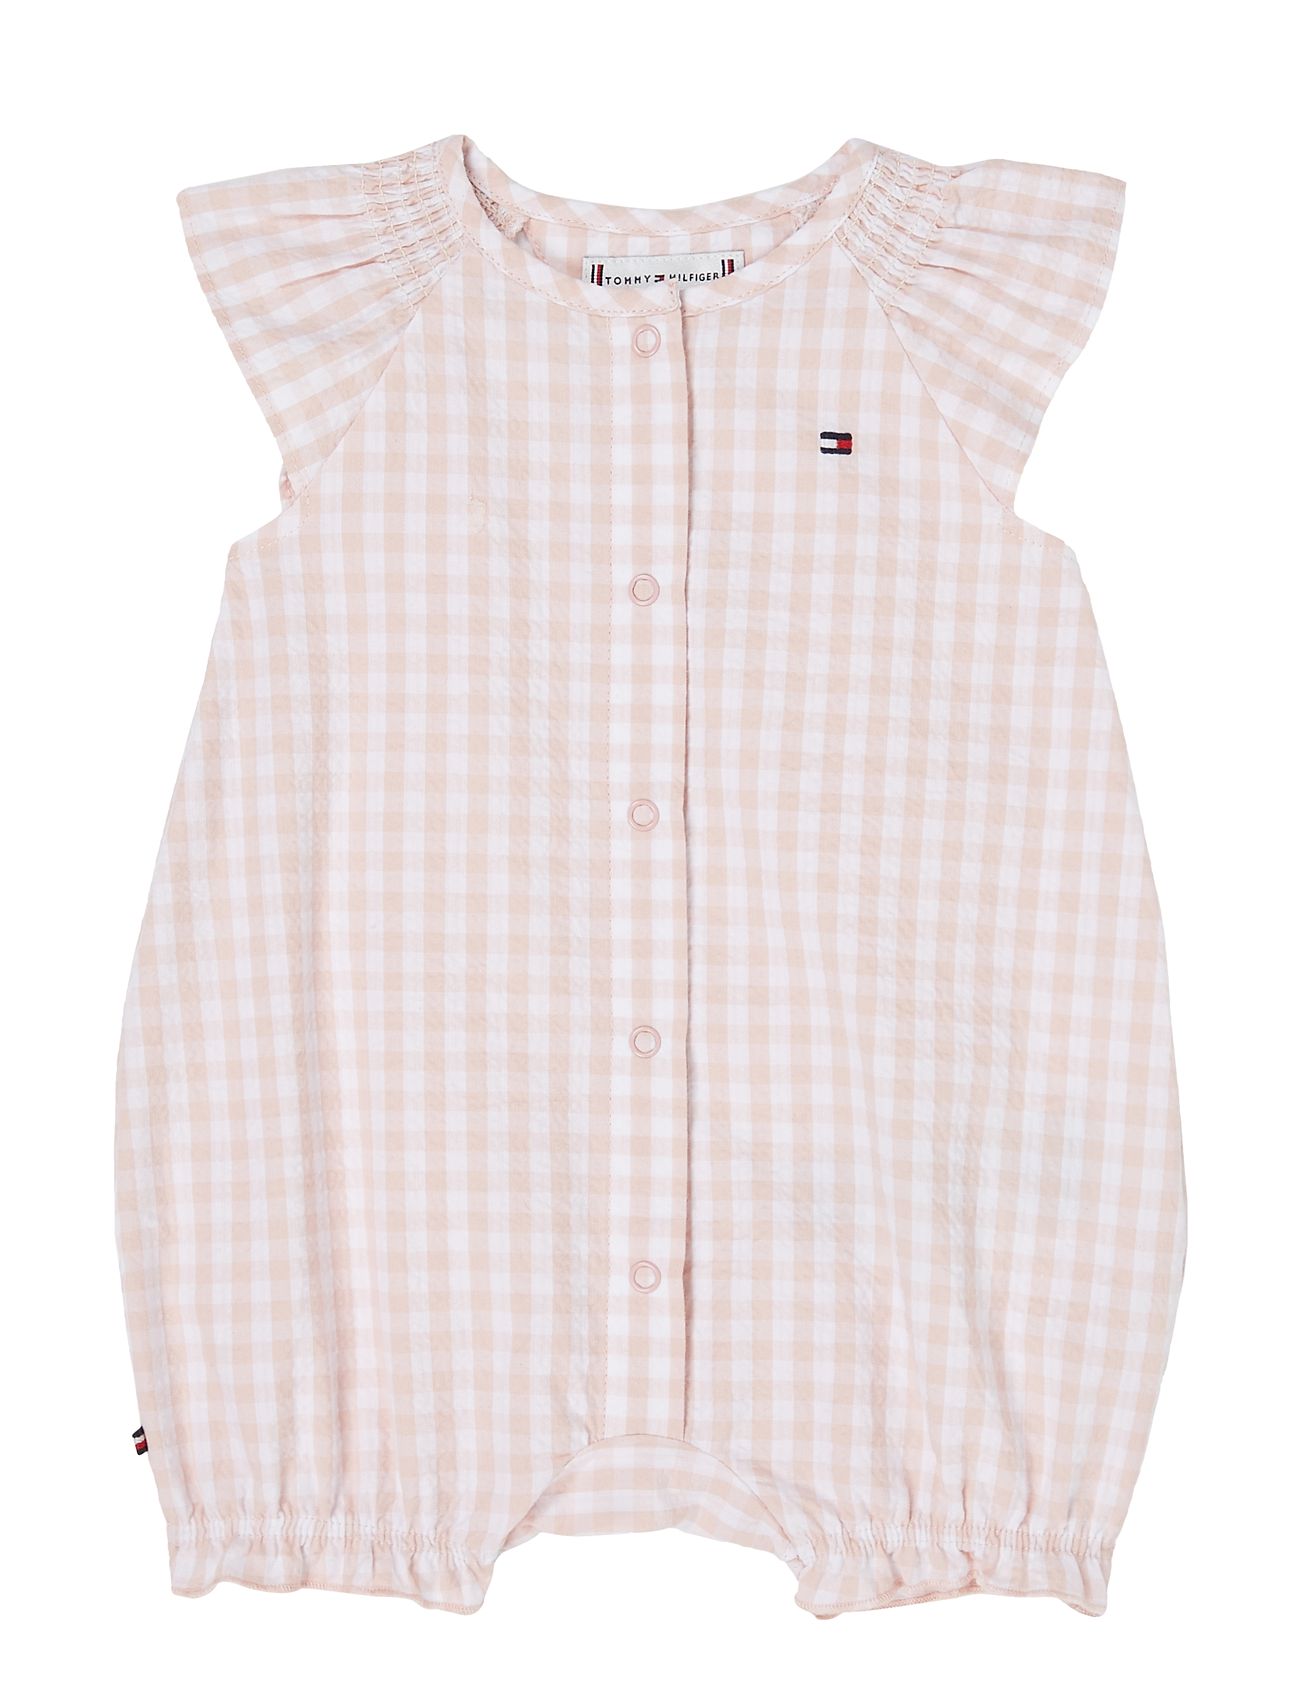 Baby Ruffle Gingham Shortall Bodysuits Short-sleeved Pink Tommy Hilfiger